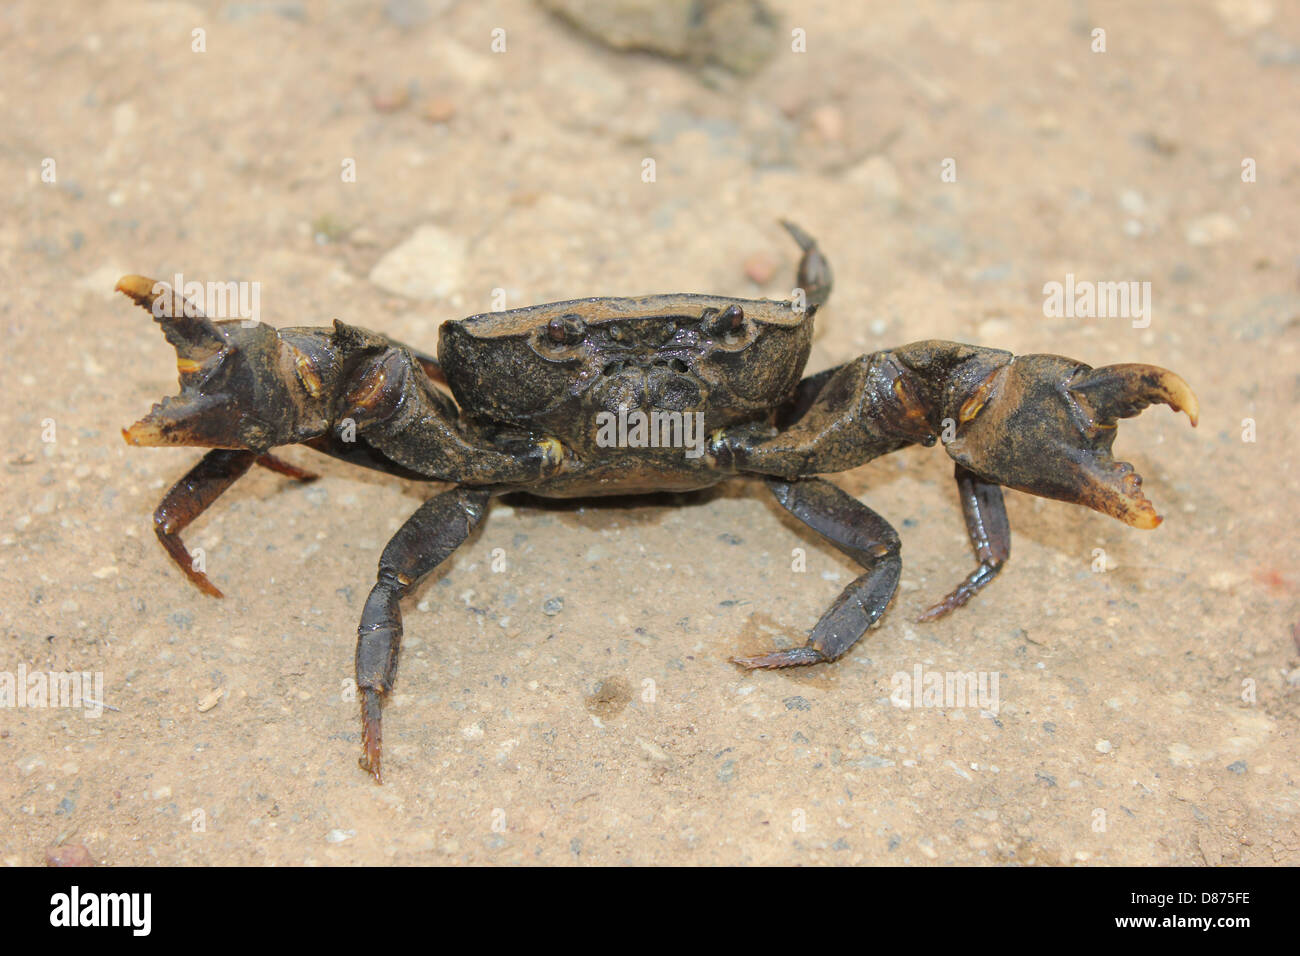 Middle image One brown healthy crab Scylla serrate from Kerala (live mud crabs or mangrove crab, black crab) economically import Stock Photo